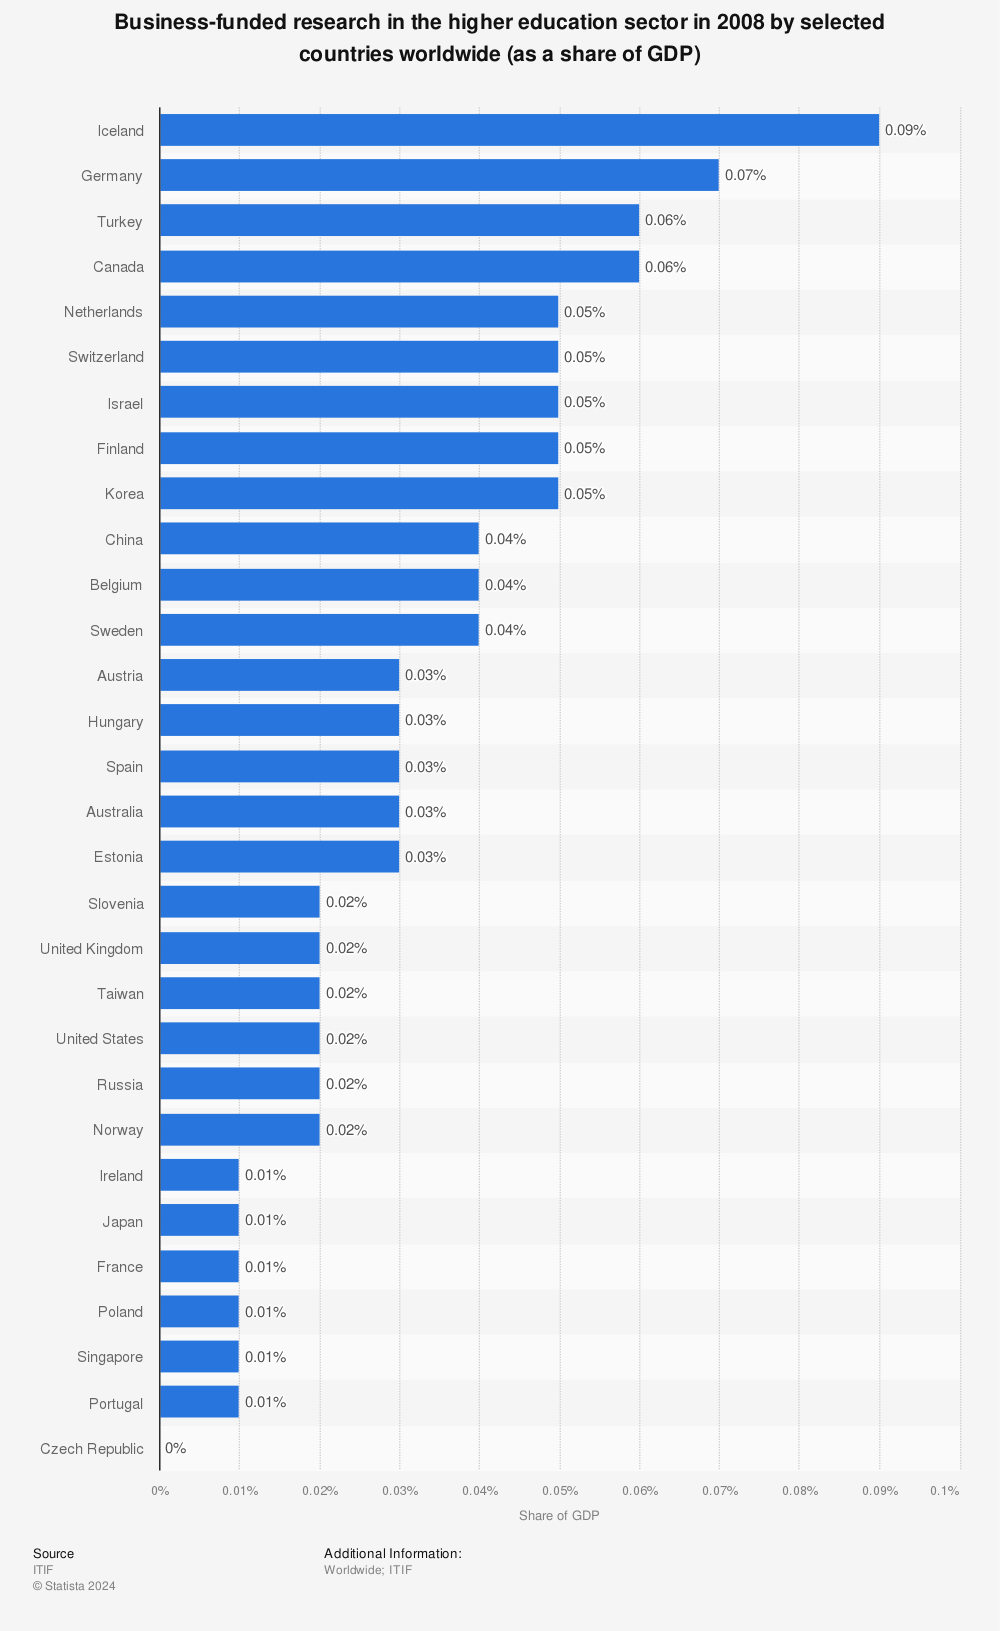 Statistic: Business-funded research in the higher education sector in 2008 by selected countries worldwide (as a share of GDP) | Statista